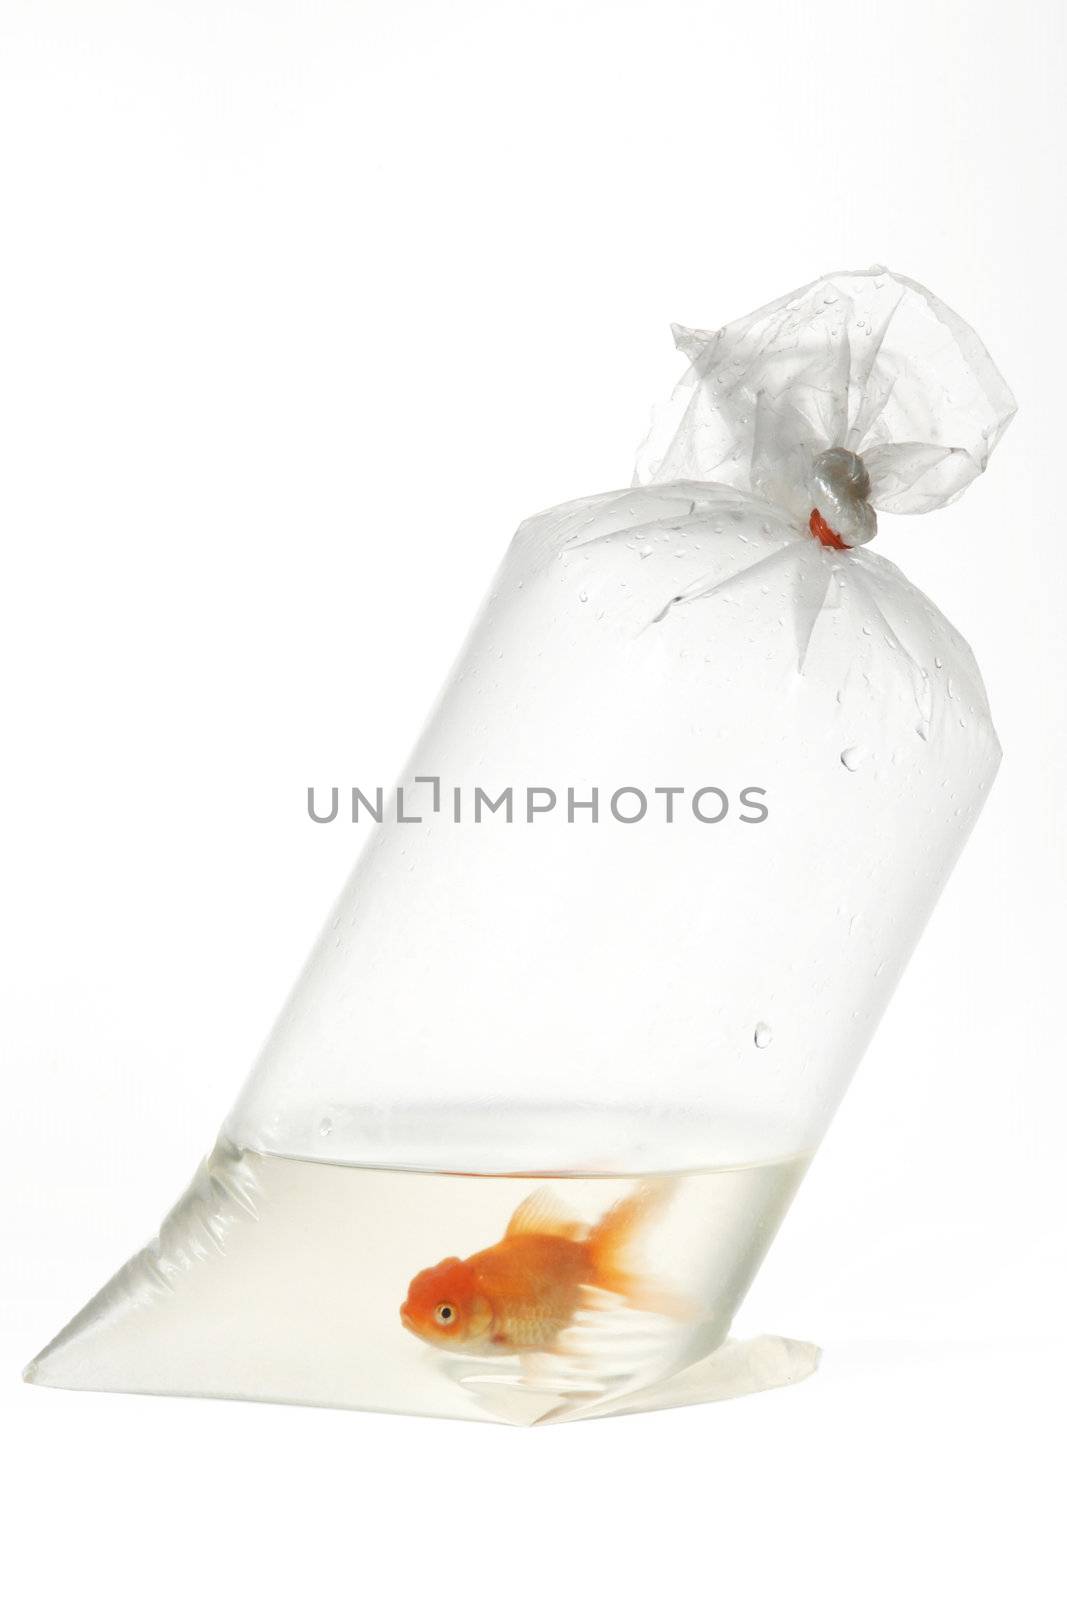 Gold fish in plastic package by velkol